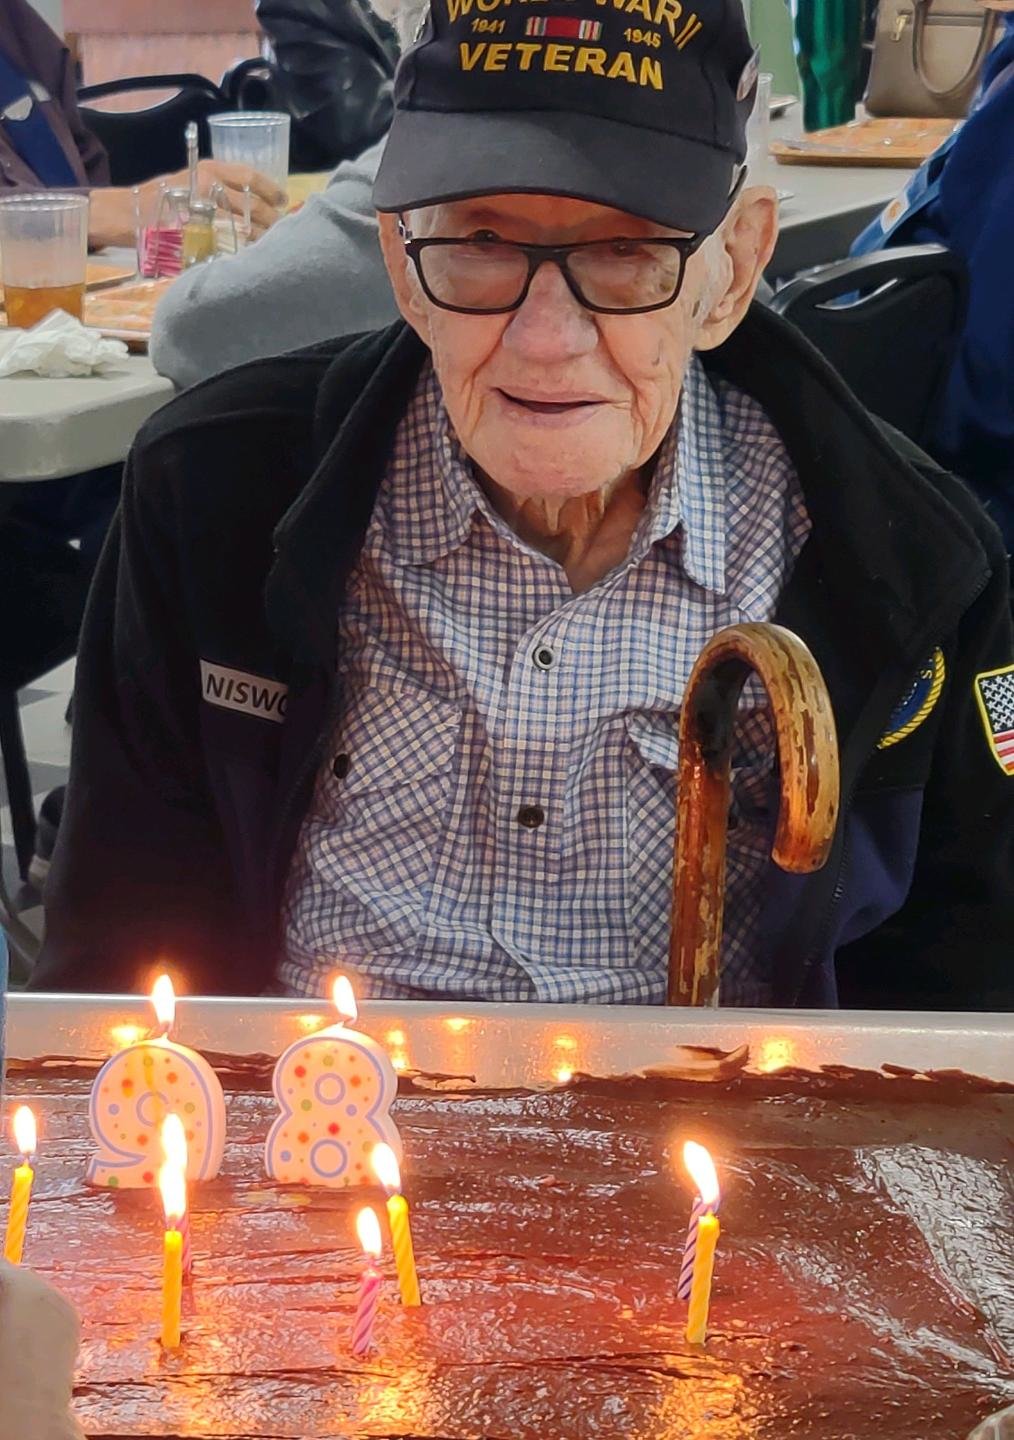 Wellsville resident Earl Niswonger attempts to blow out the candles on his birthday cake during his 98th birthday celebration on April 19 at the Montgomery County Senior Center.